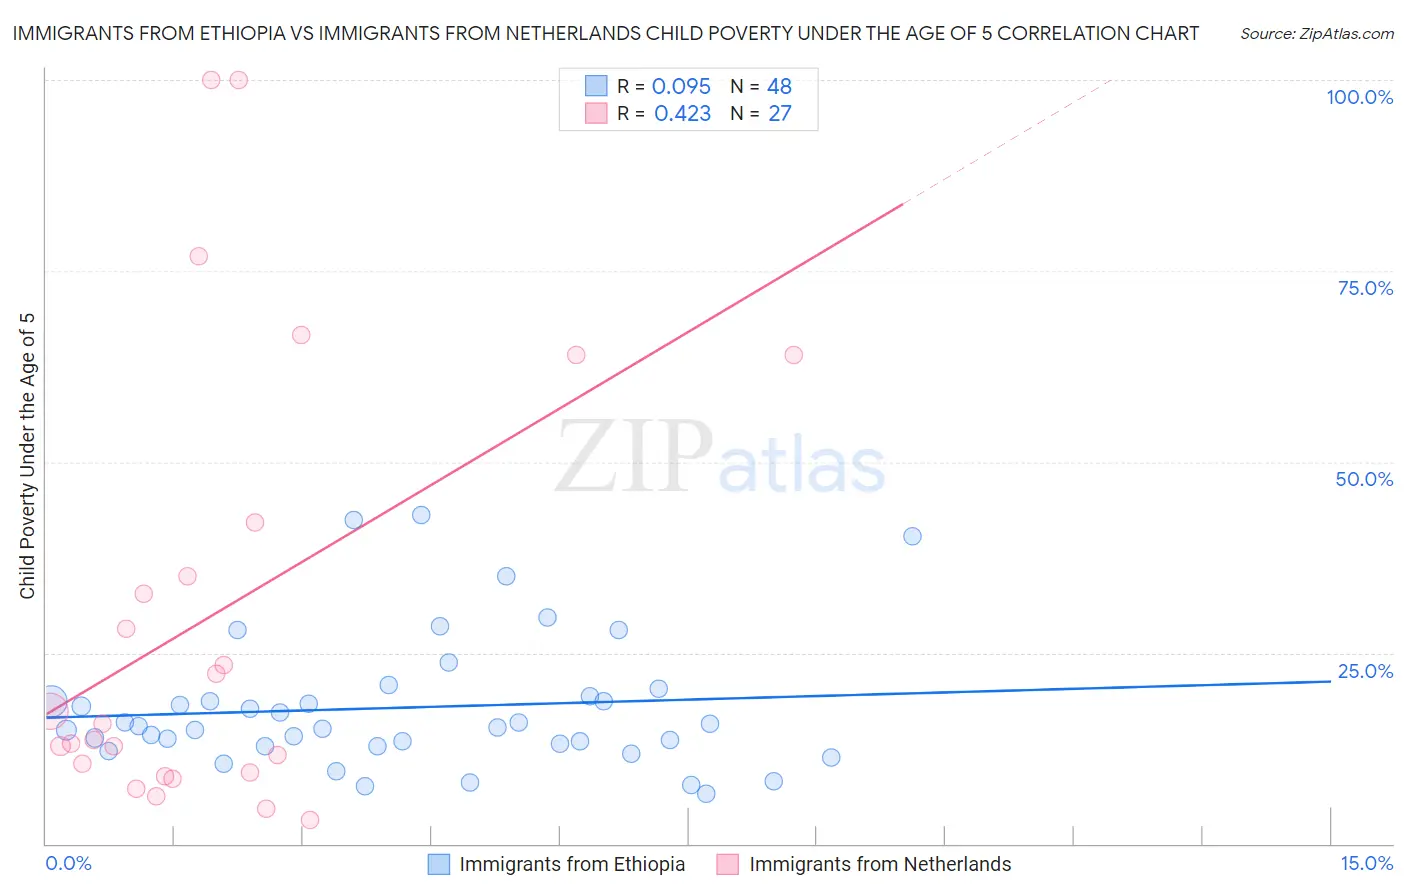 Immigrants from Ethiopia vs Immigrants from Netherlands Child Poverty Under the Age of 5